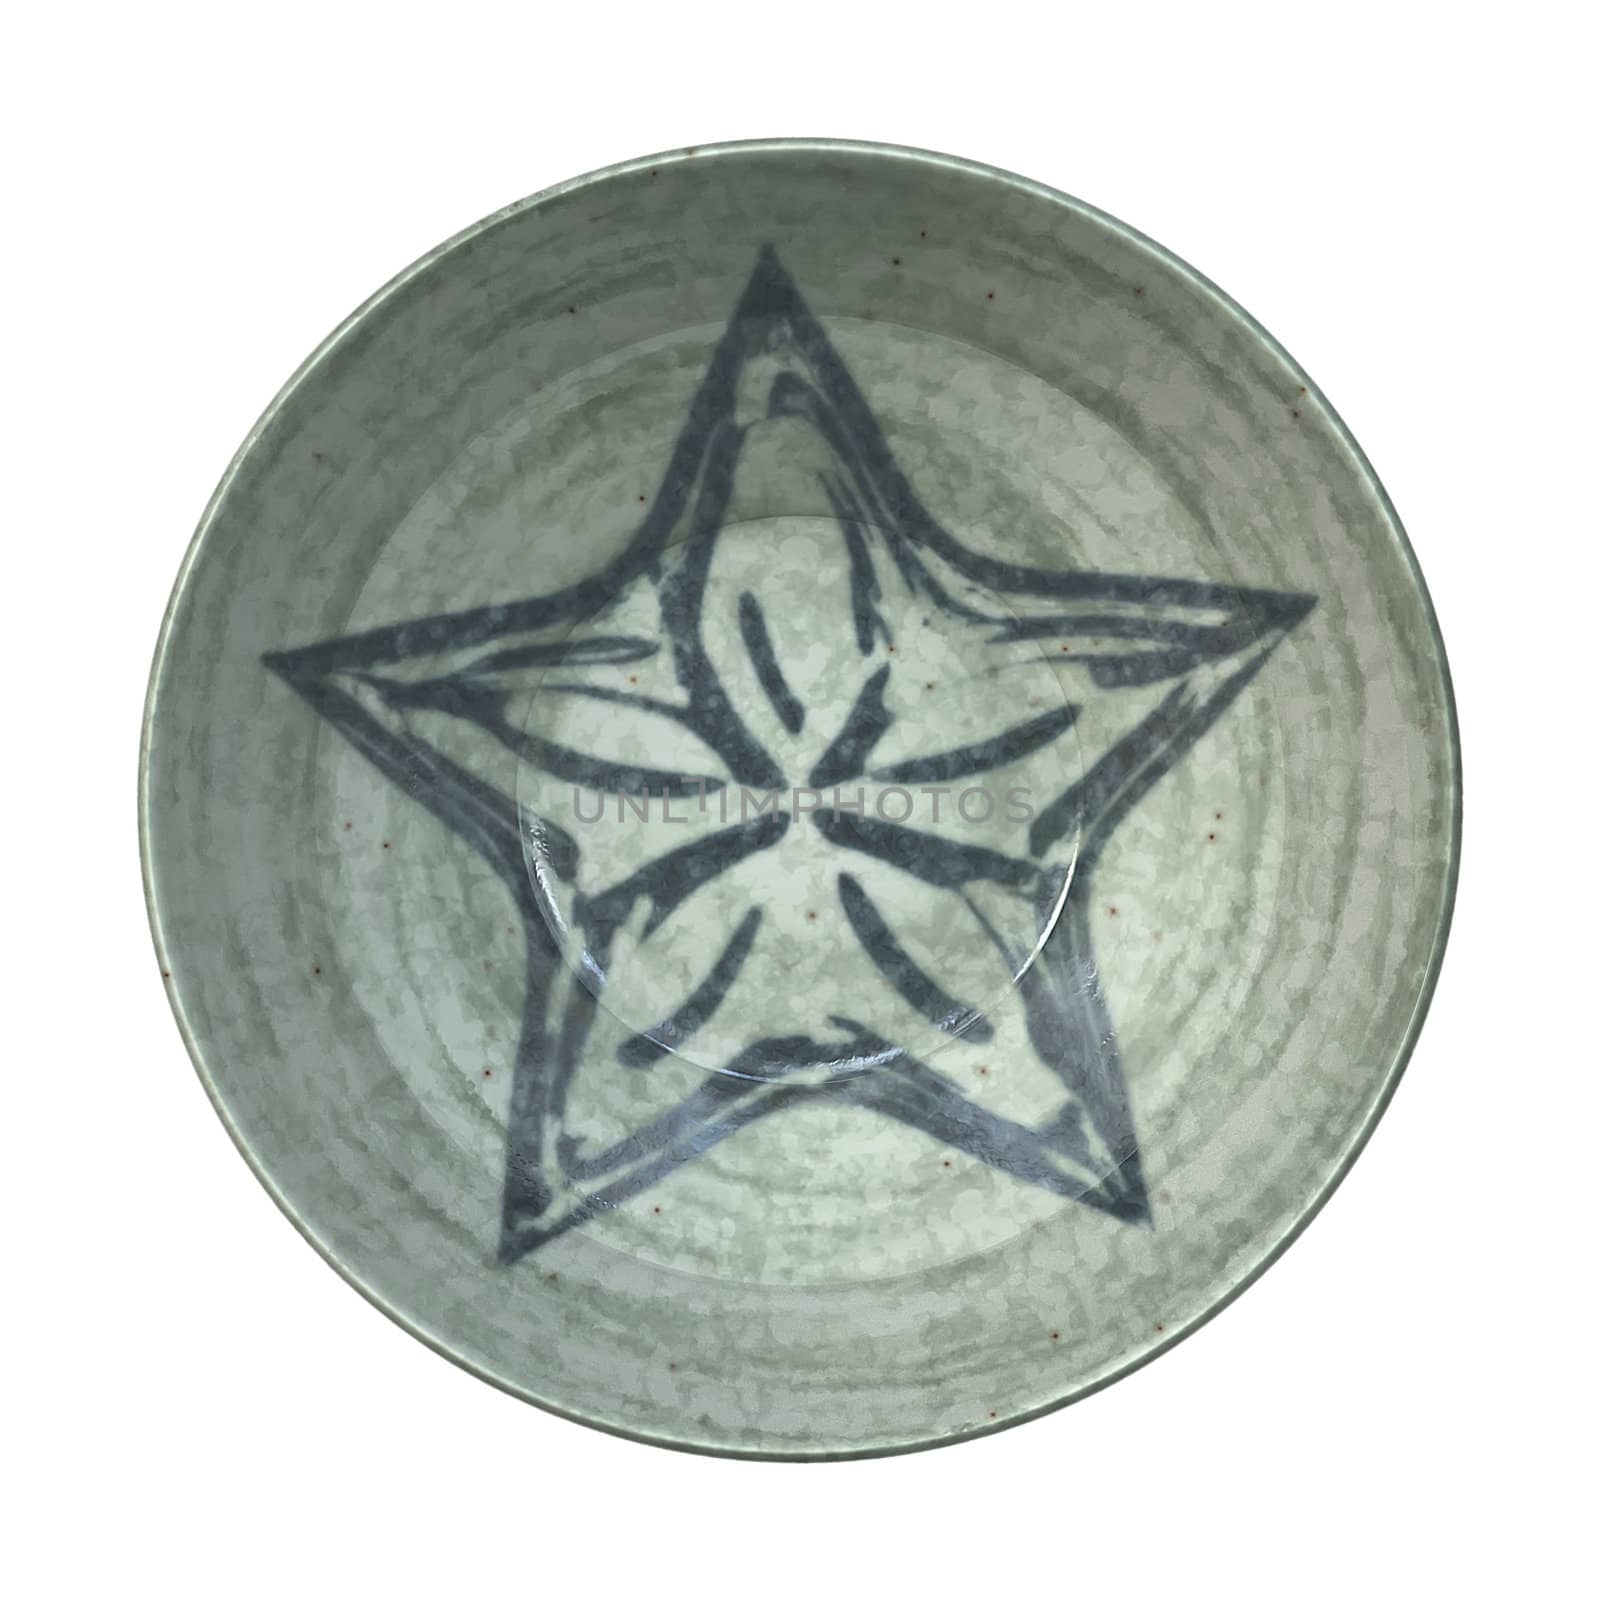 An image of a nice pottery plate with a star